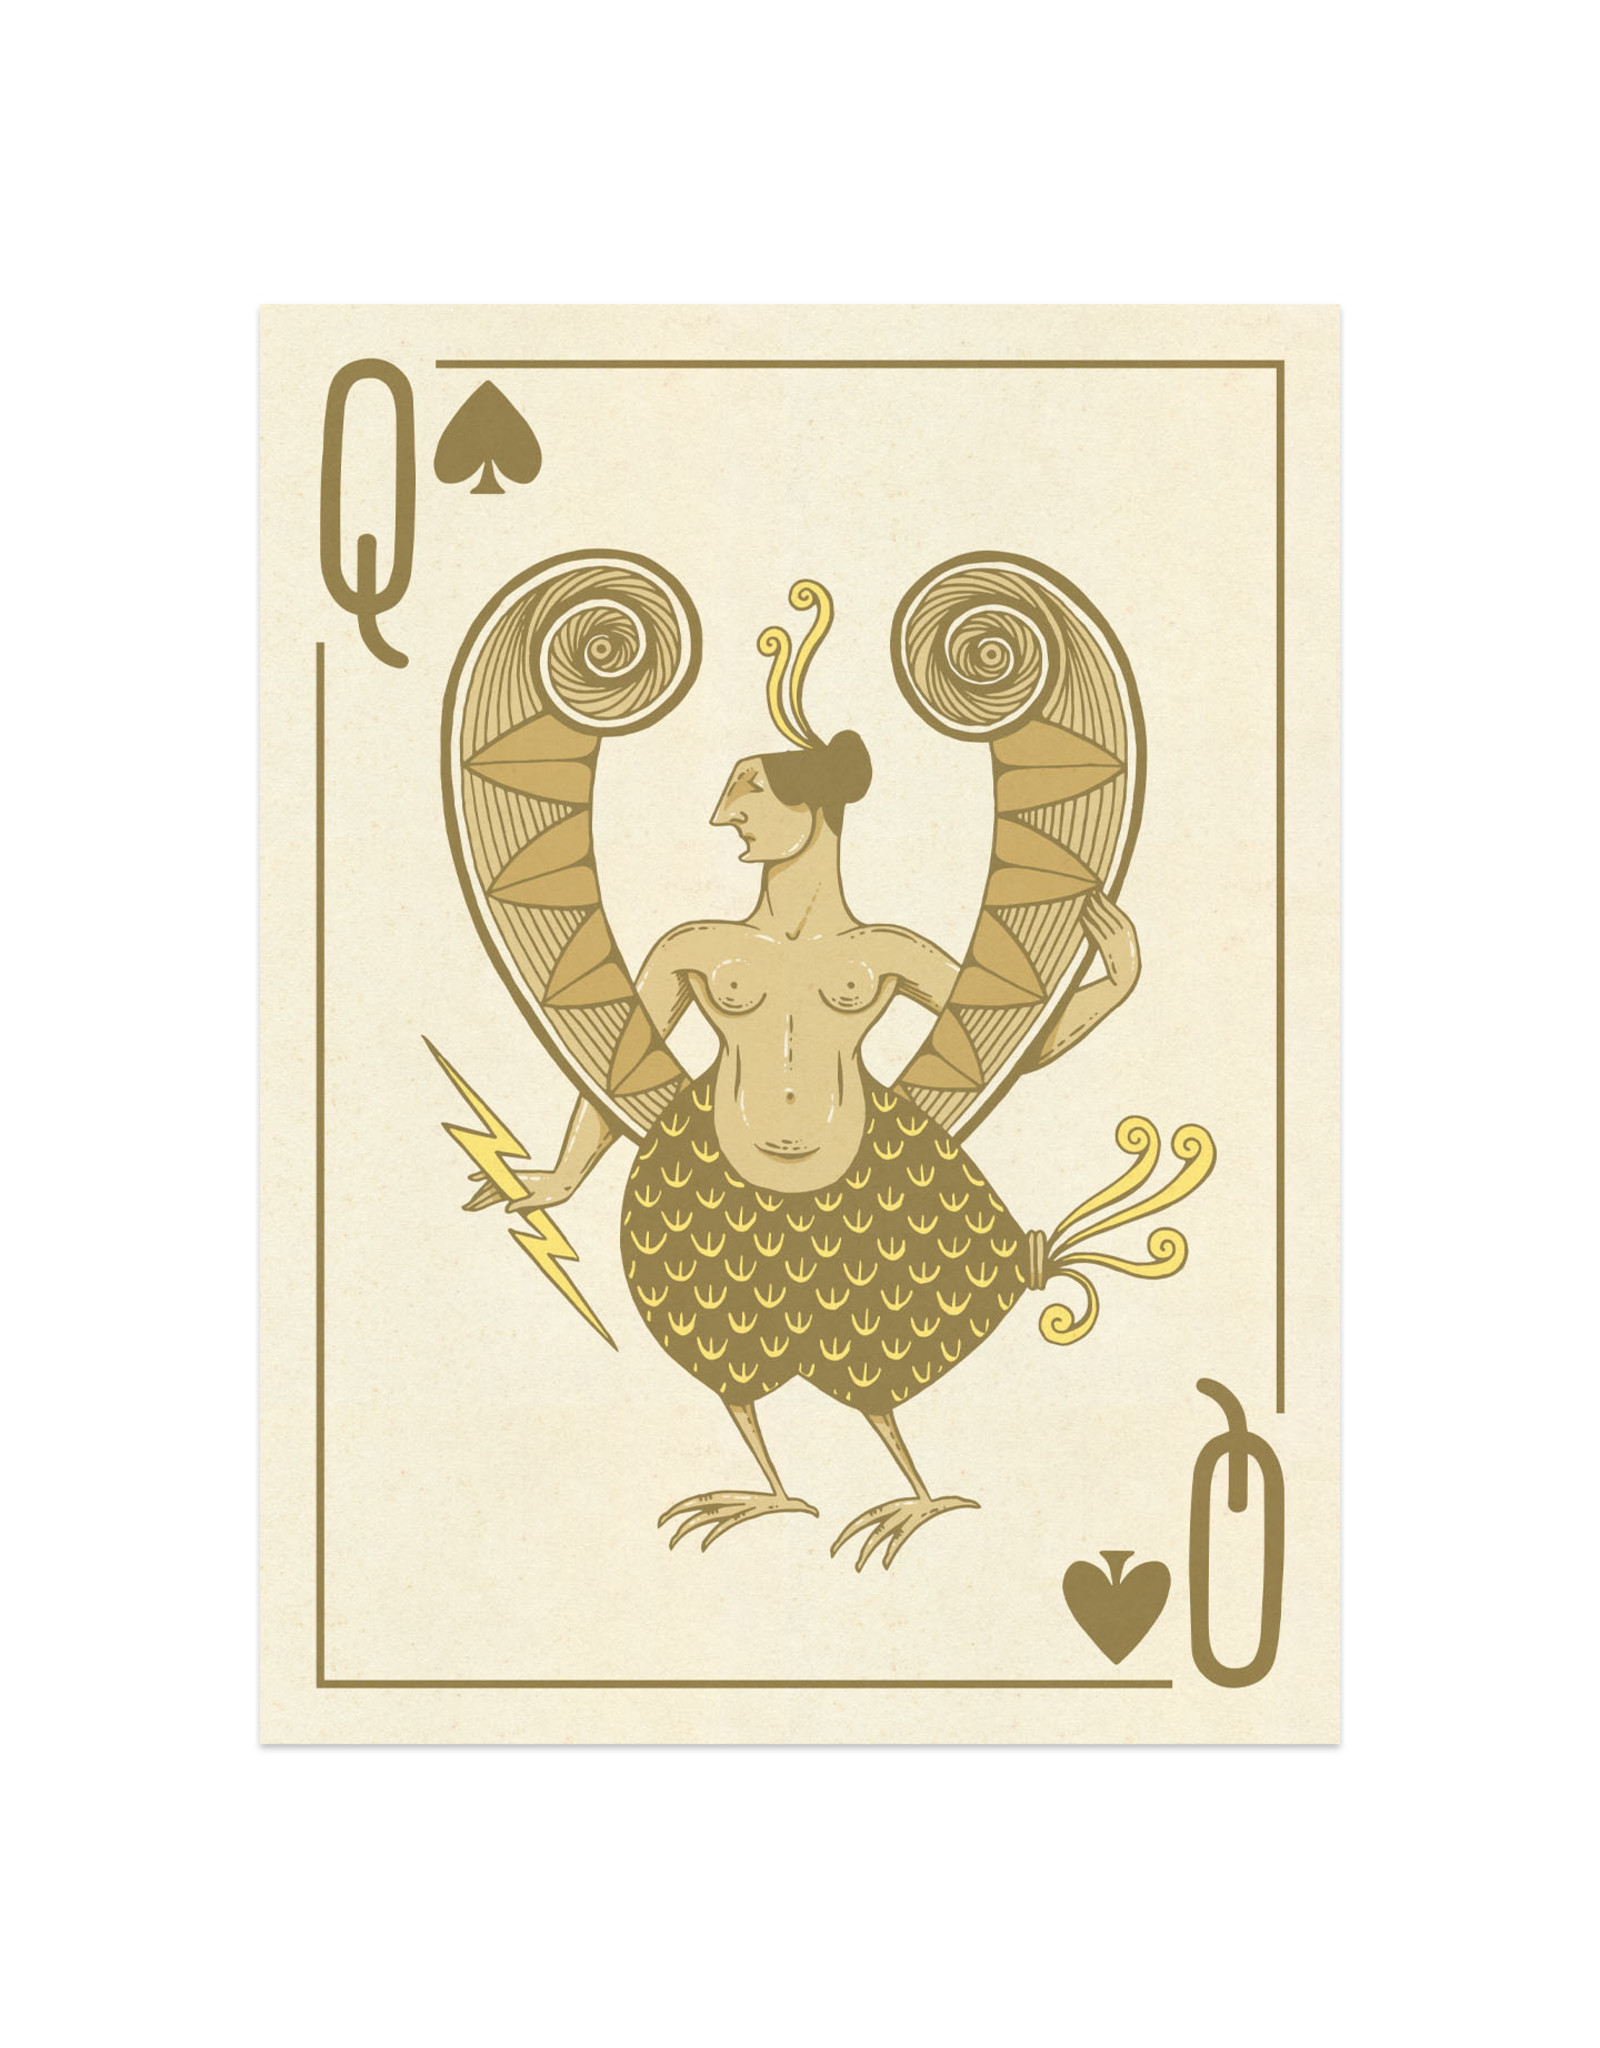 Playing Card Print - Queen of Spades